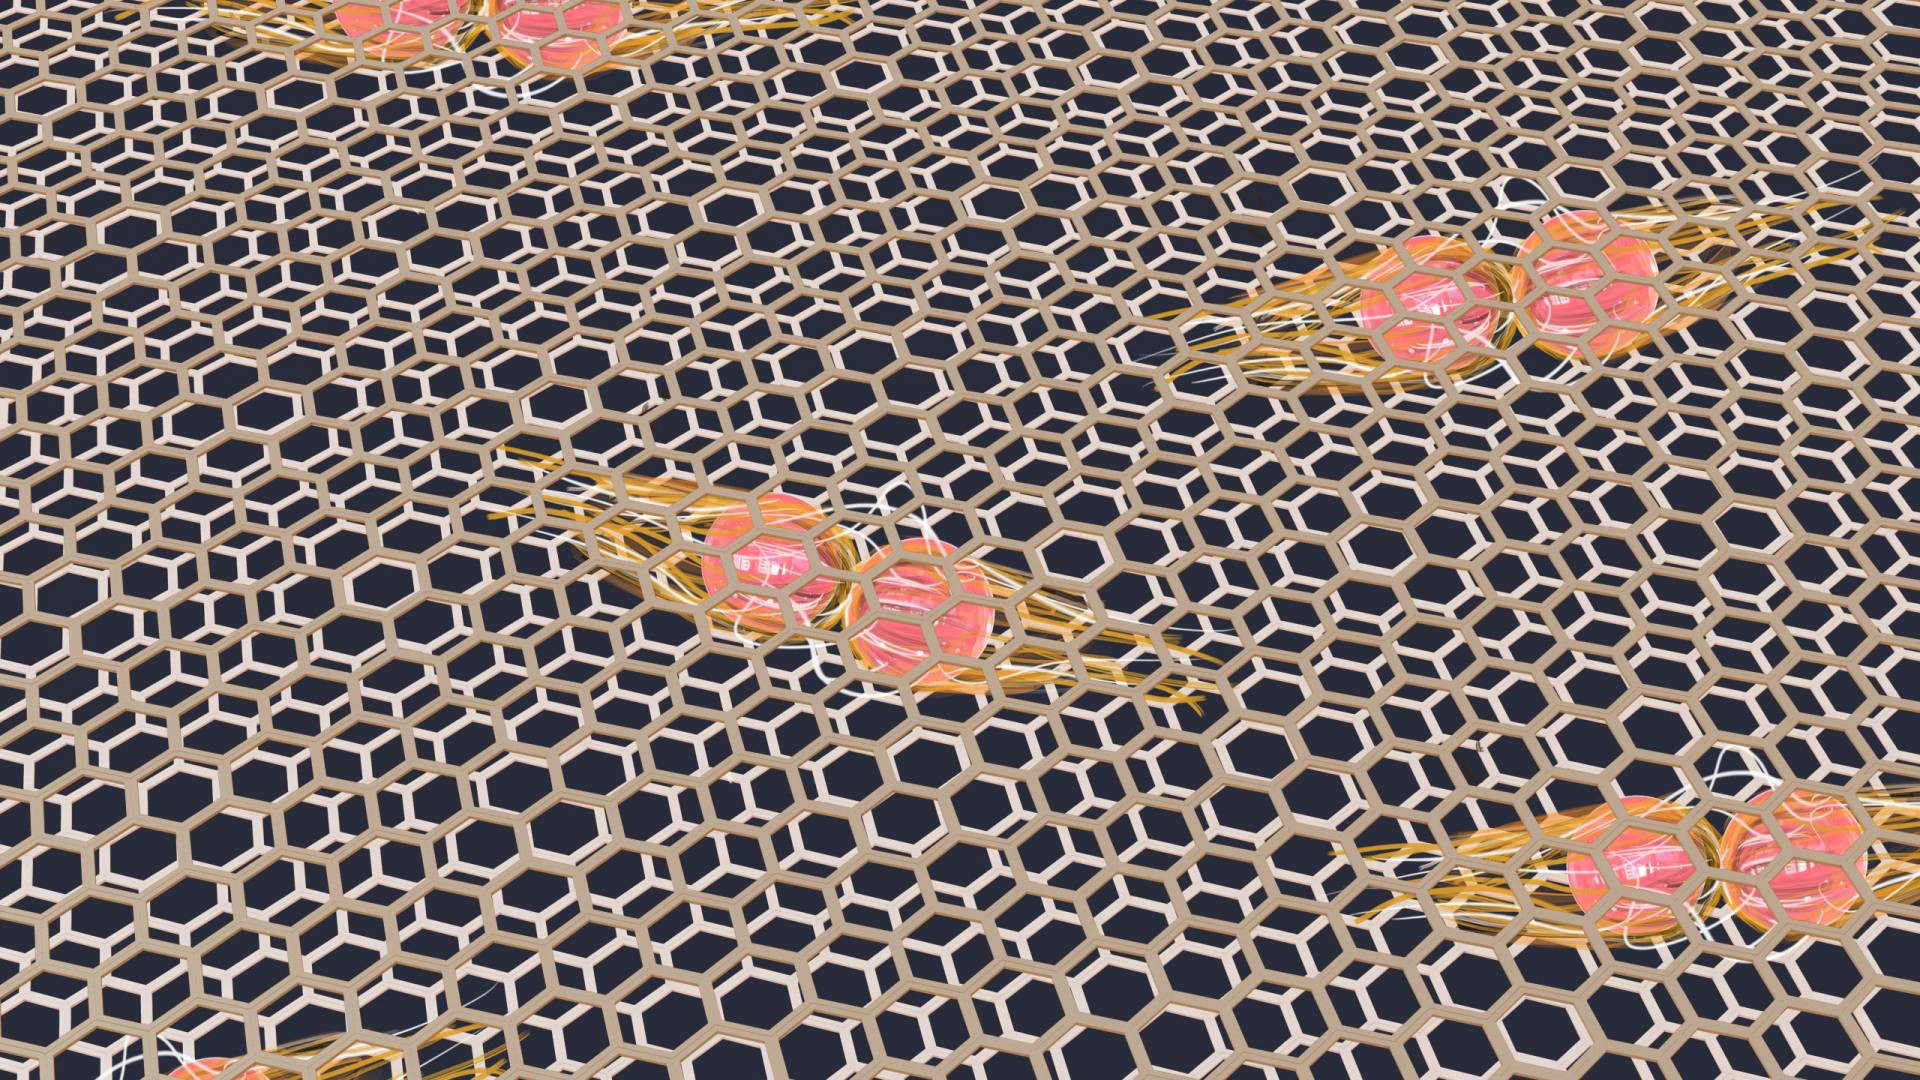 Multiple sets of pink spheres embedded in a mesh like grid.